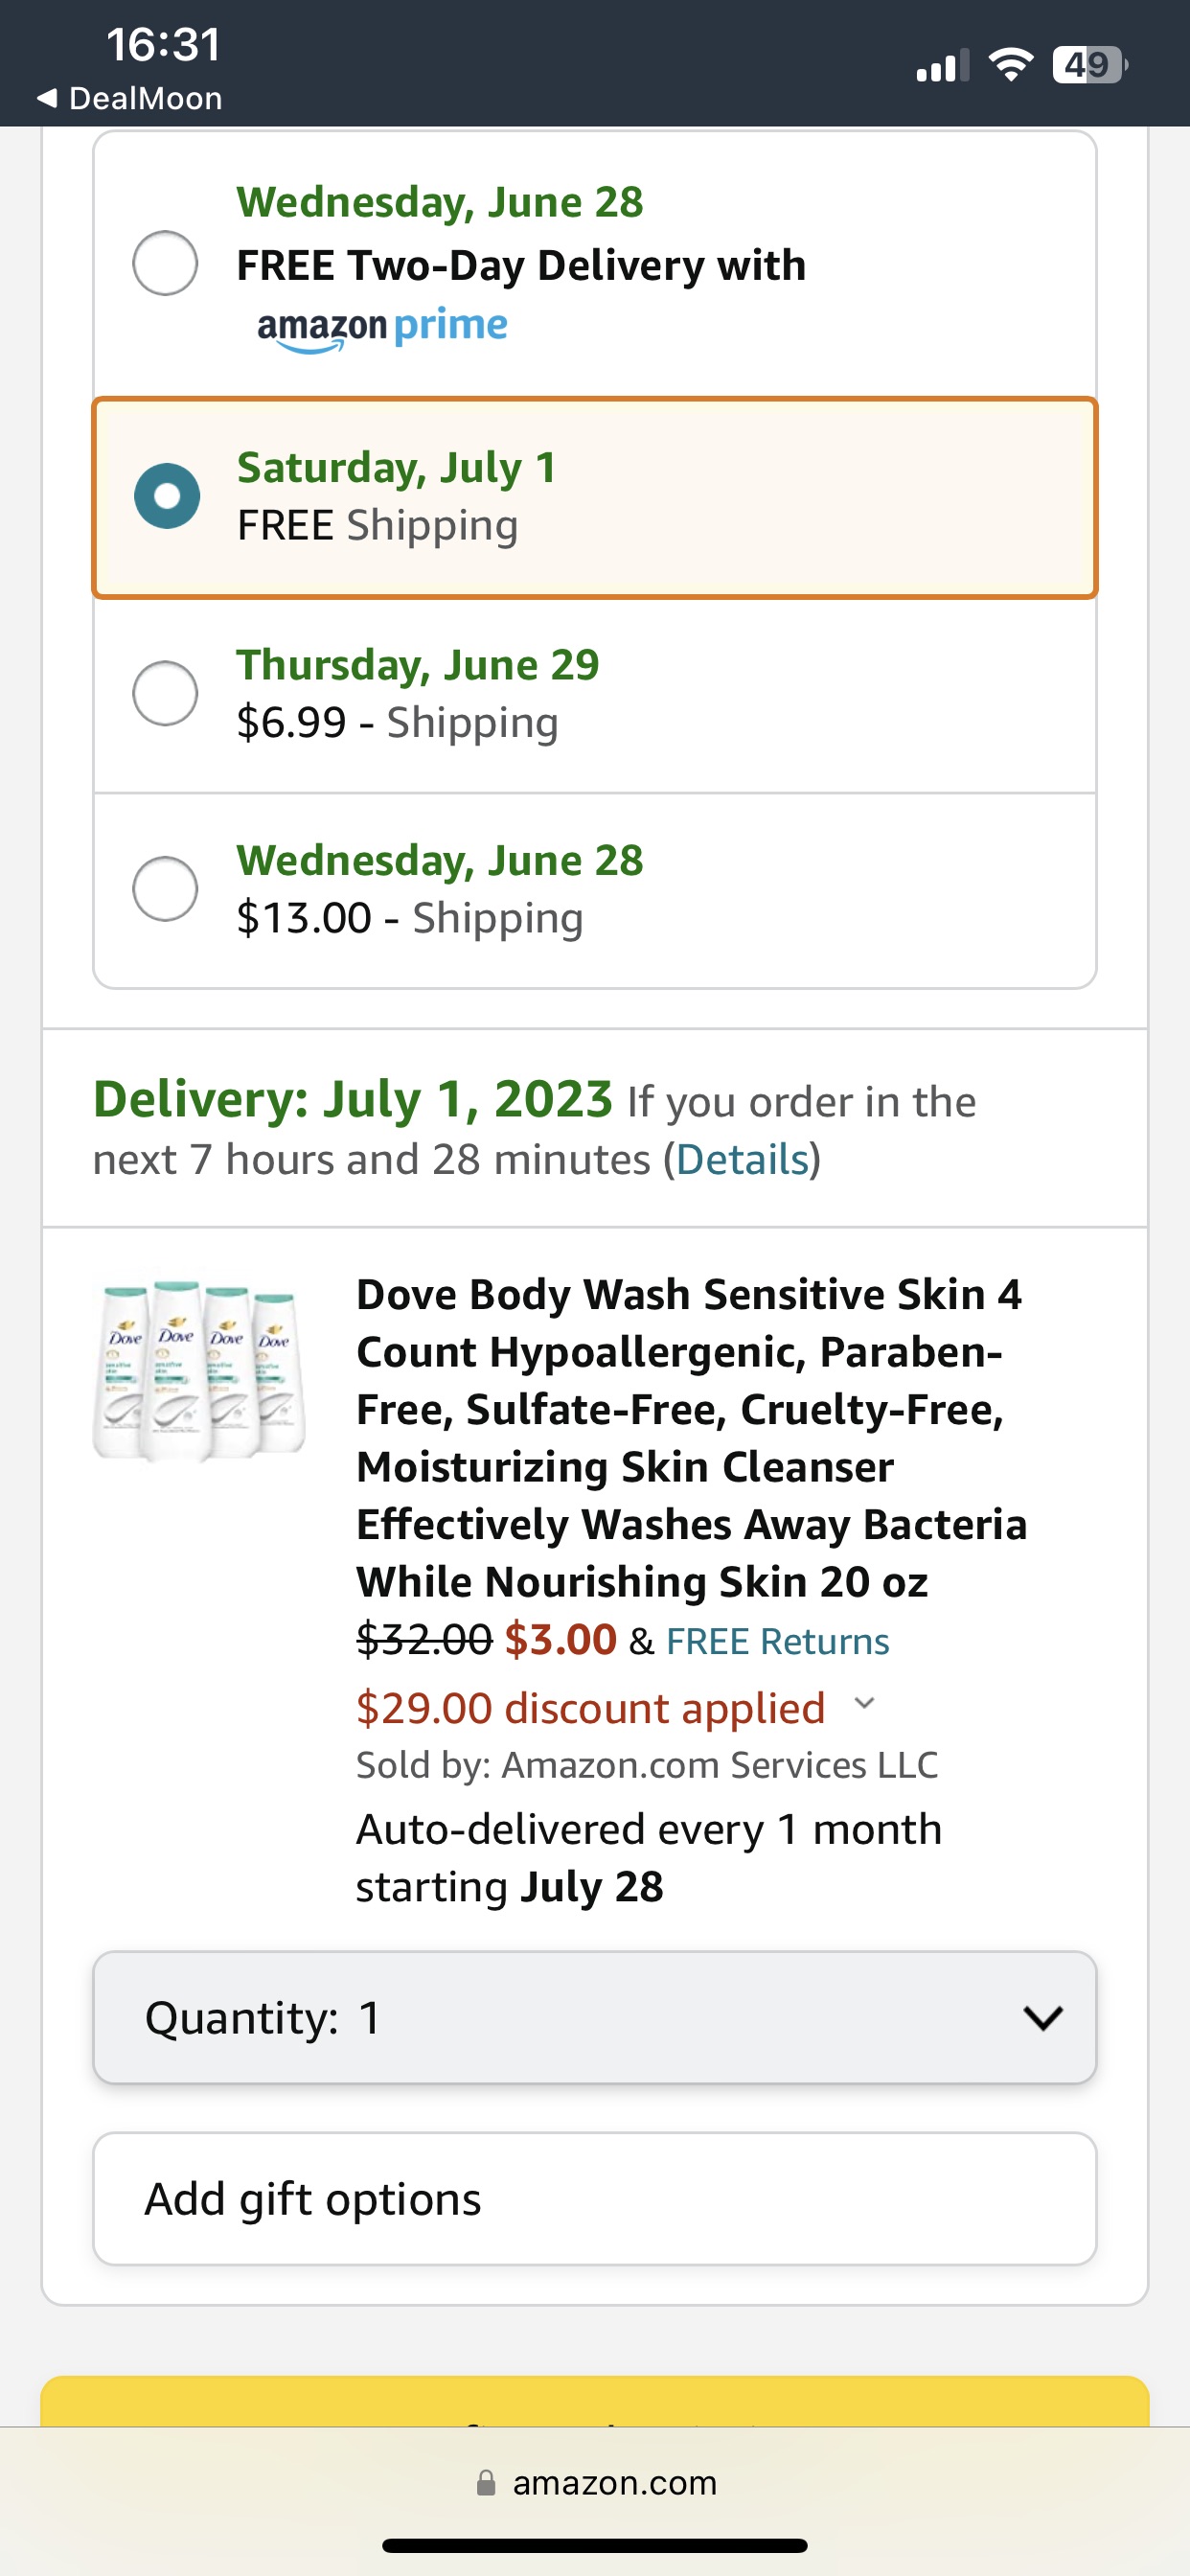 Amazon.com : Dove Body Wash Sensitive Skin 4 Count Hypoallergenic, Paraben-Free, Sulfate-Free, Cruelty-Free, Moisturizing Skin Cleanser Effectively Washes Away Bacteria While Nourishing Skin 20 oz : Beauty & Personal Care